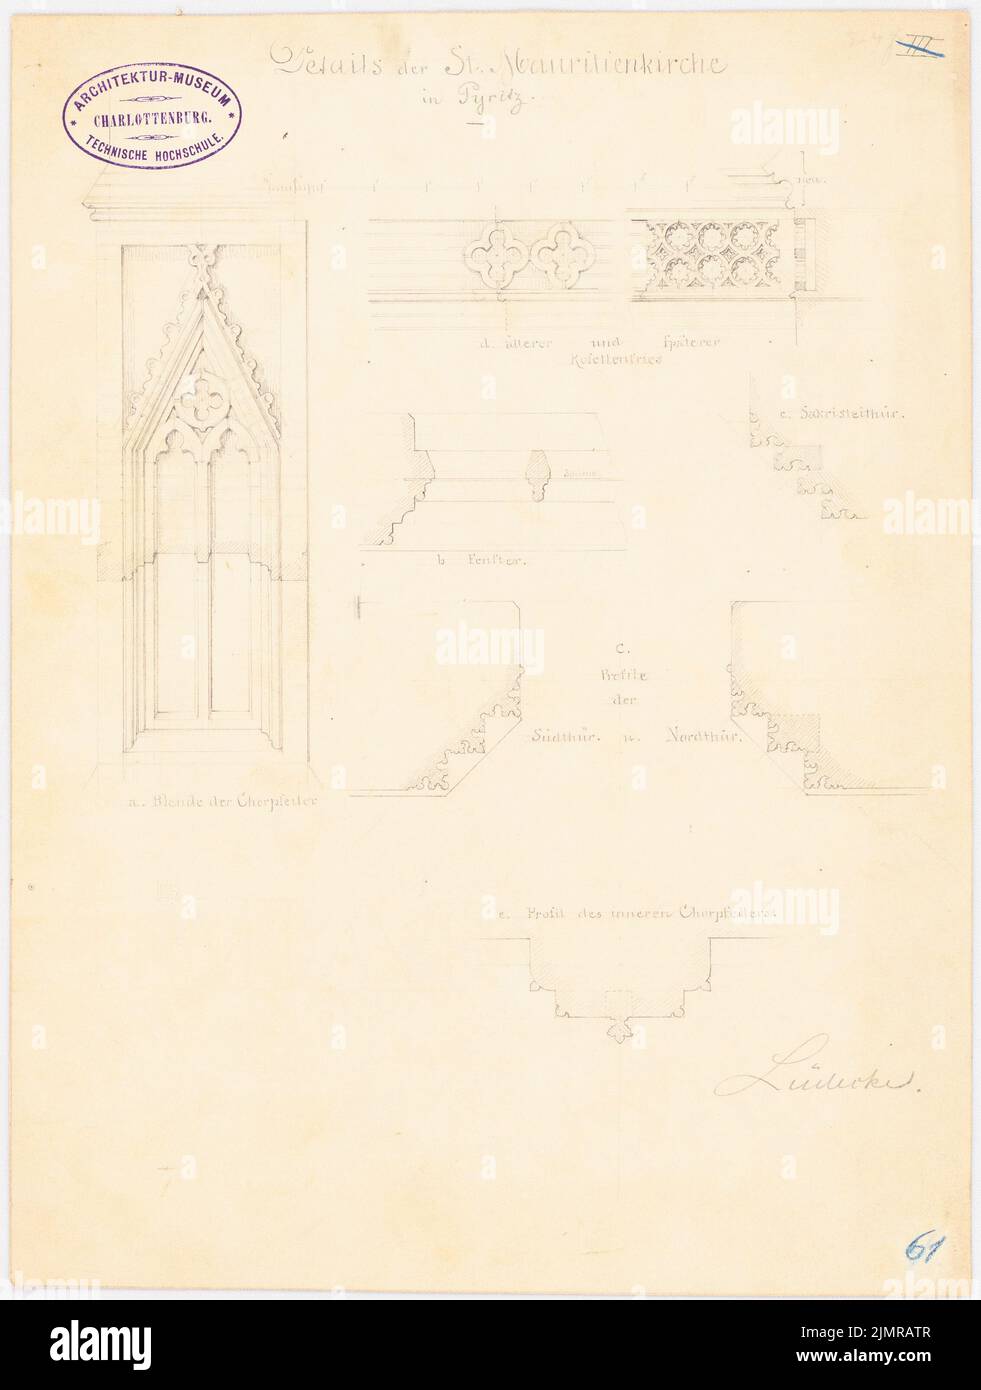 Lüdecke Carl Johann Bogislaw (1826-1894), St. Mauritiuskirche in Pyritz. Restoration and recording (approx. 1853): masonry details in a cut and view (with scale bar). Pencil on cardboard, 32.7 x 24.7 cm (including scan edges) Lüdecke Carl Johann Bogislaw  (1826-1894): St. Mauritiuskirche, Pyritz. Restaurierung und Aufnahme Stock Photo